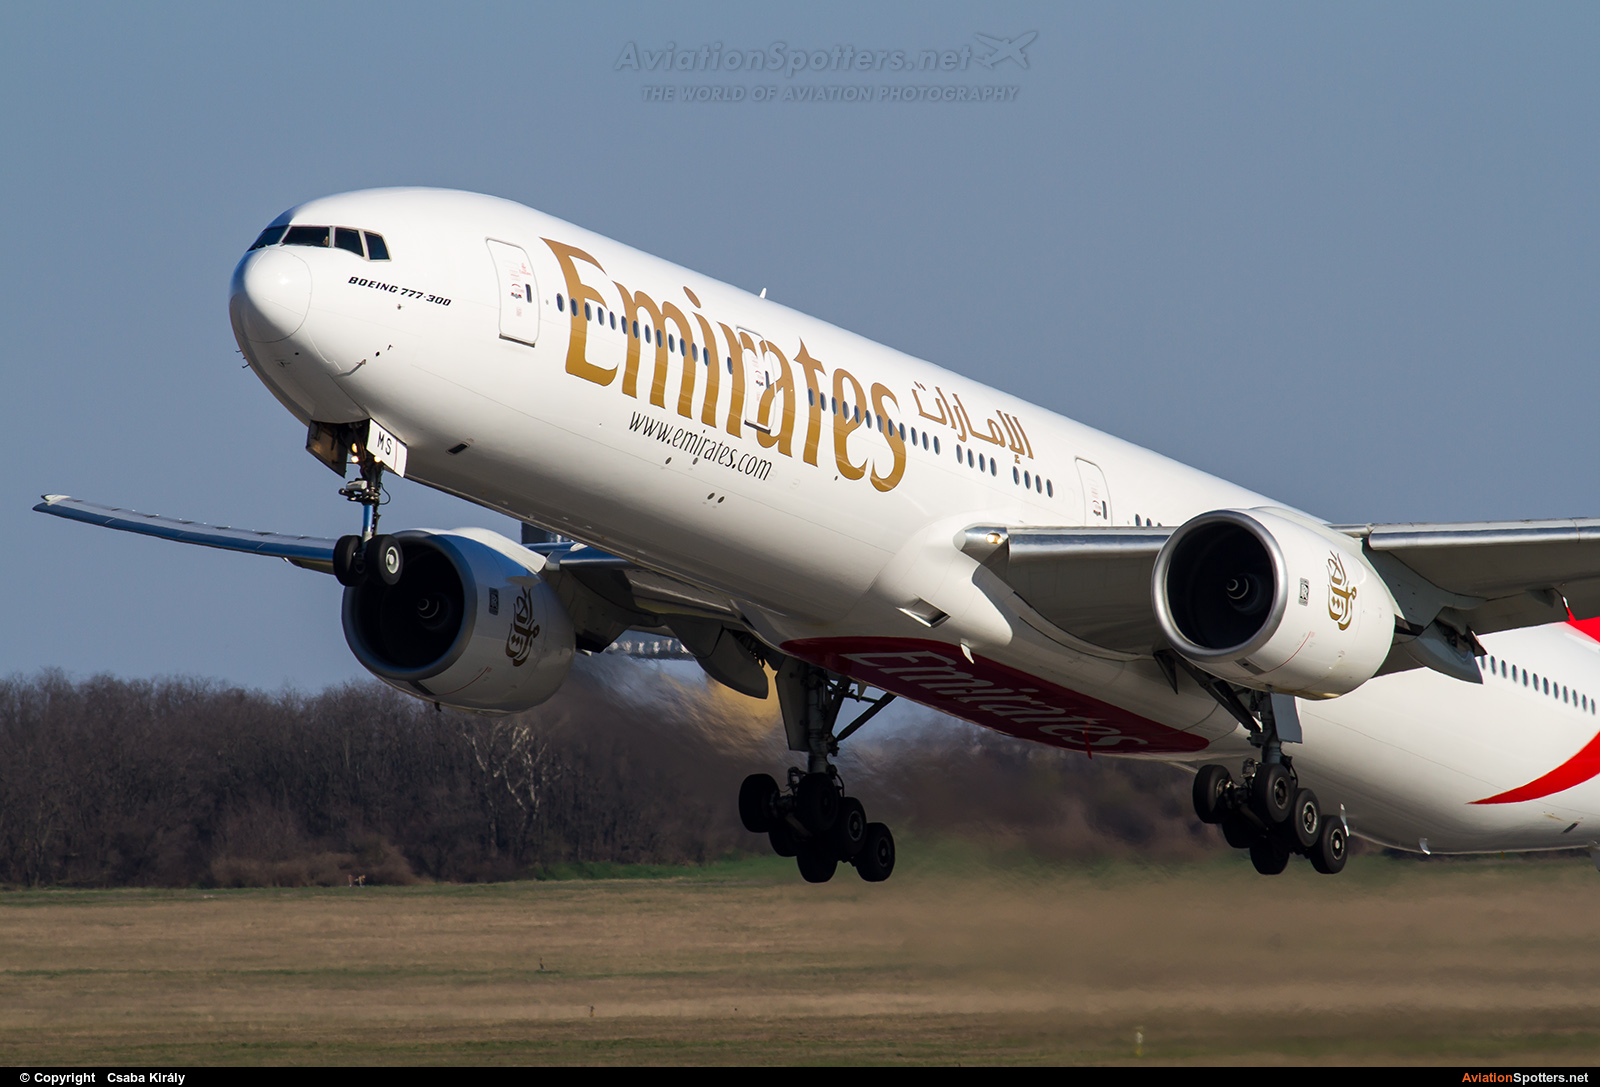 Emirates Airlines  -  777-300  (A6-EMS) By Csaba Király (Csaba Kiraly)